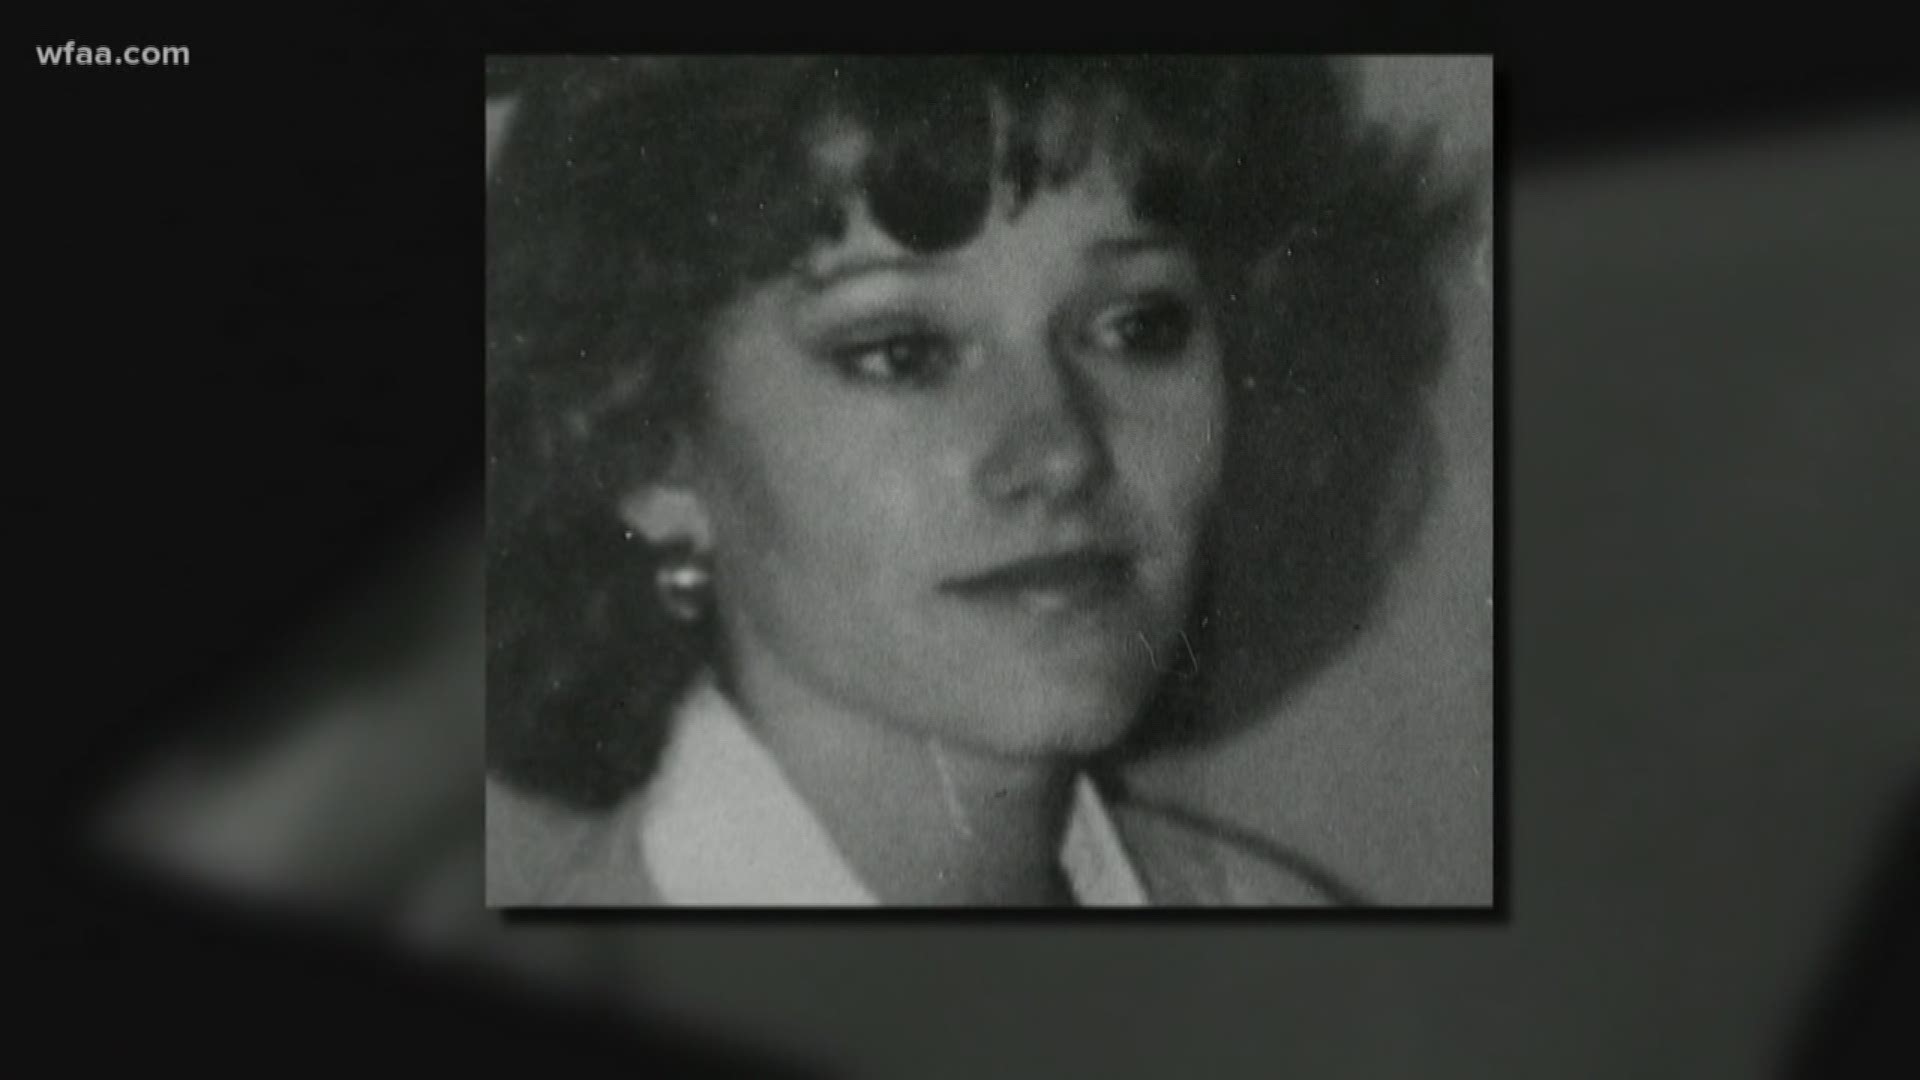 Holly Palmer was just 23 when she was beaten to death at a Granbury bus stop. Her murder has never been solved.